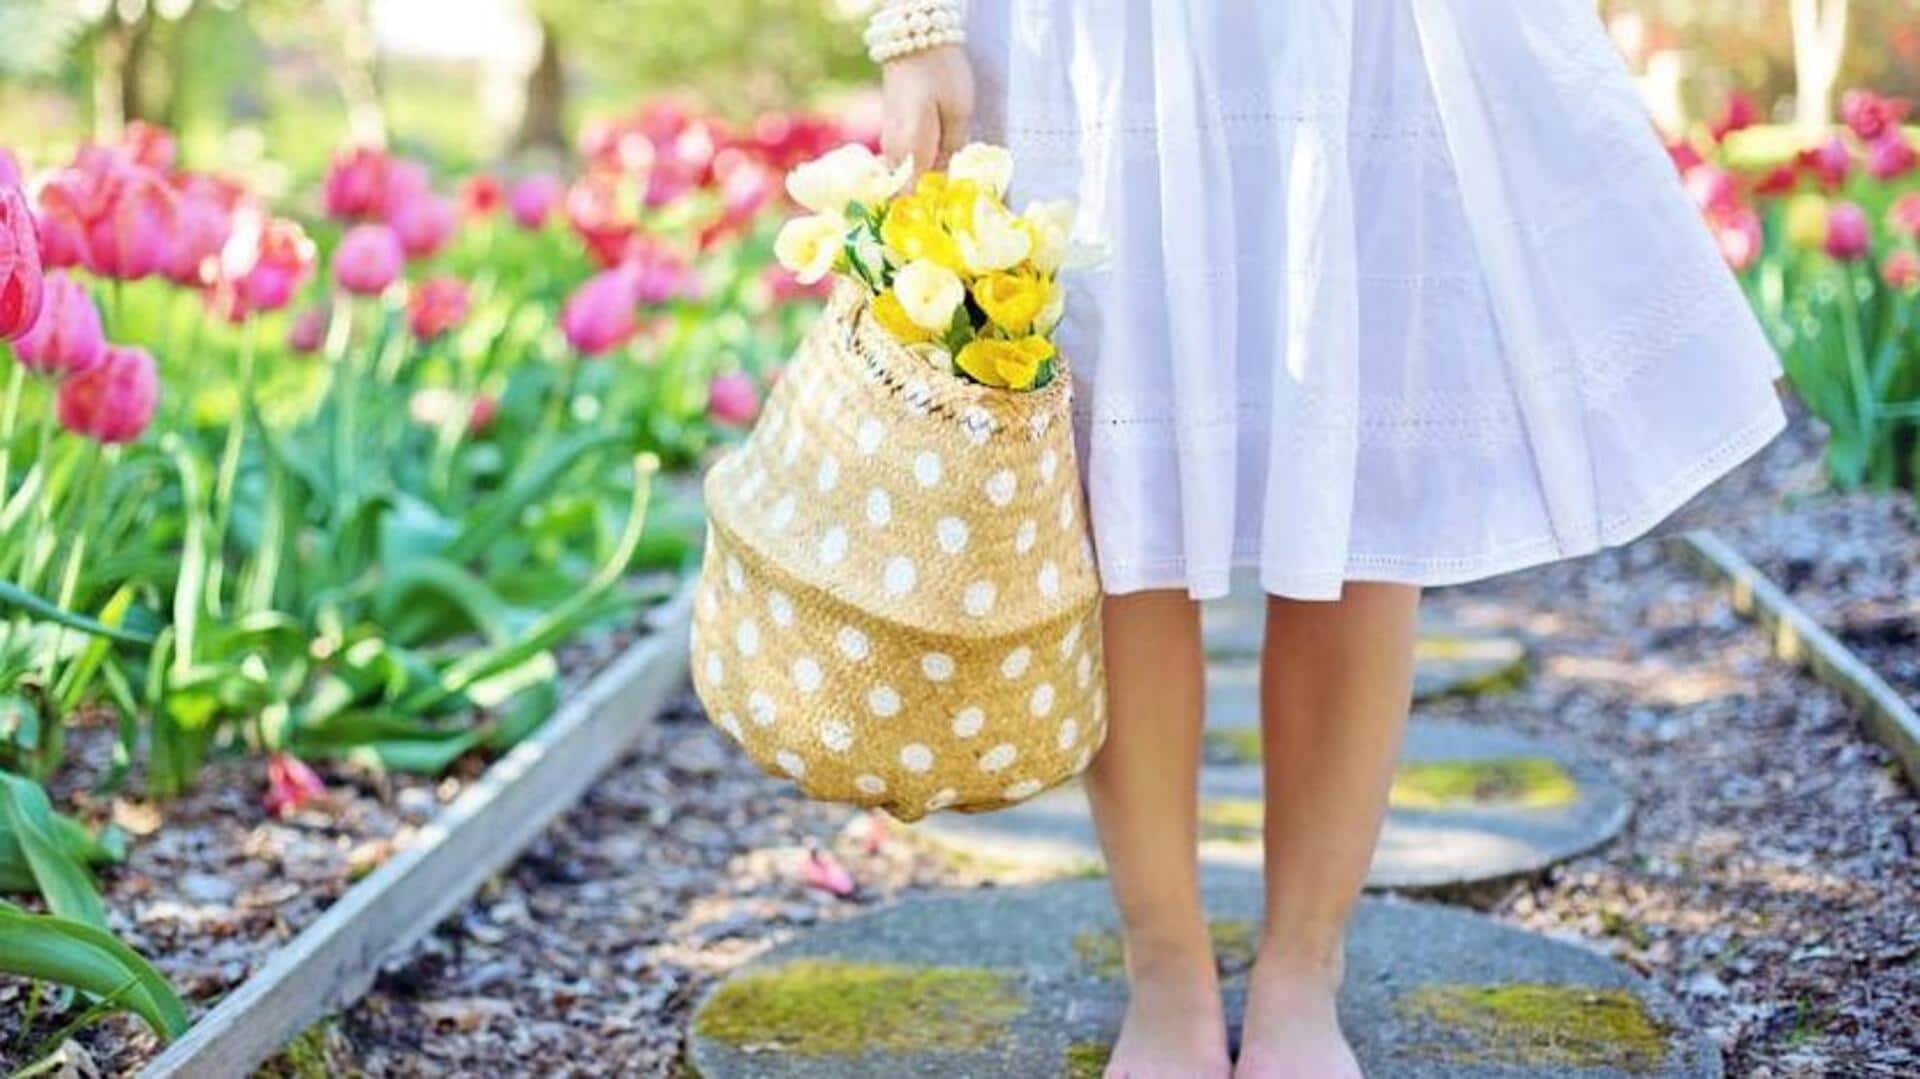 Blooming responsibly: Sustainable spring fashion hacks to follow